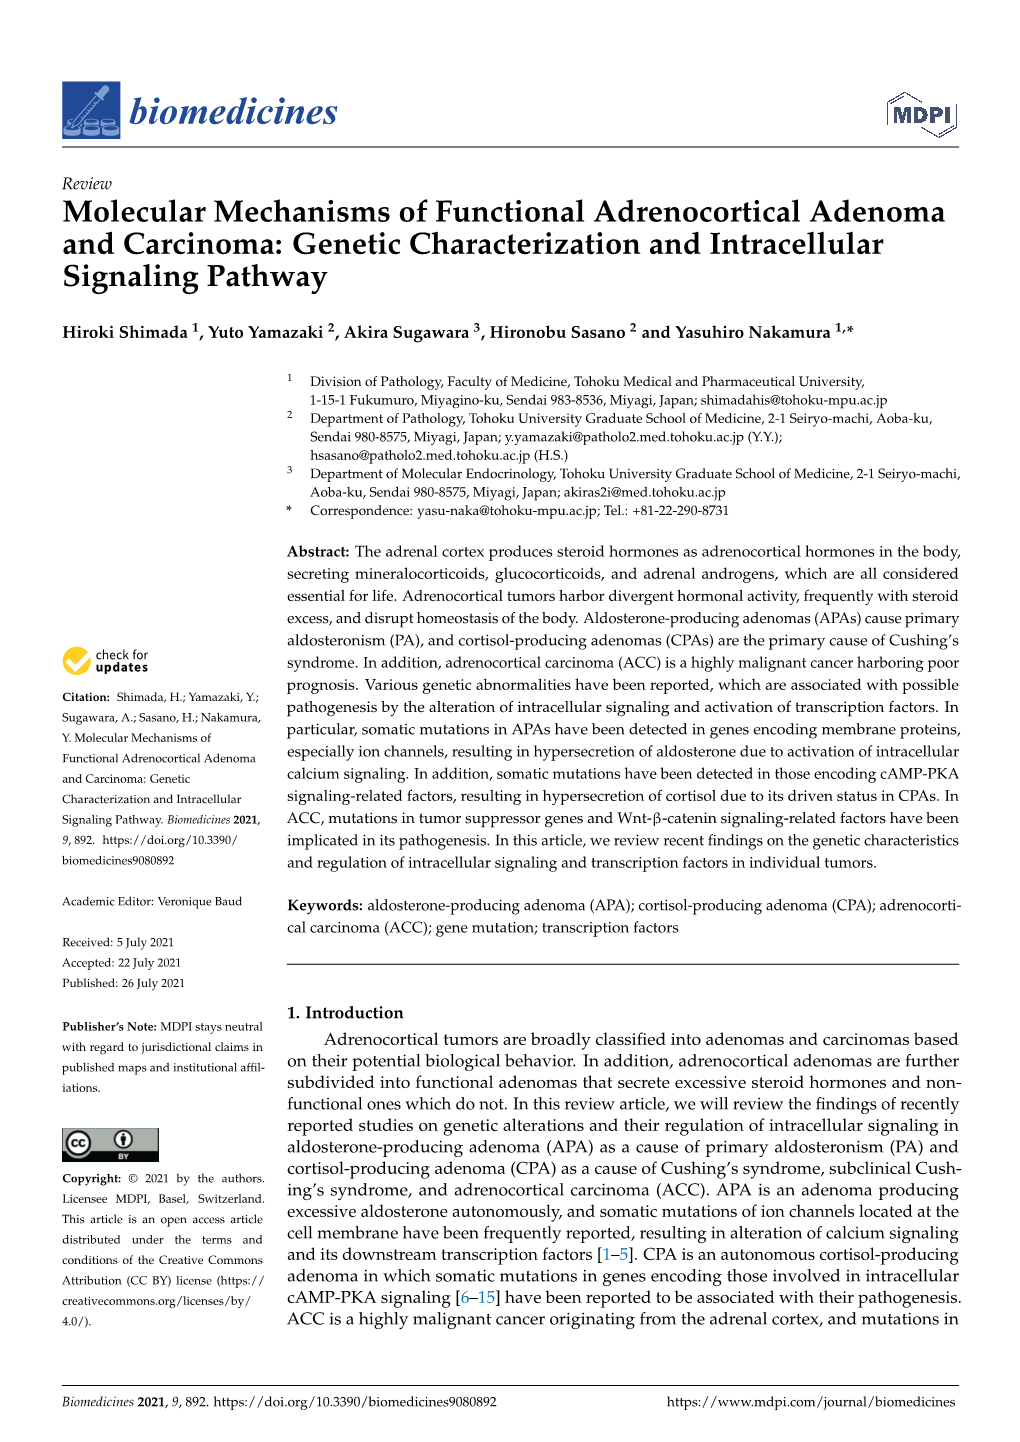 Molecular Mechanisms of Functional Adrenocortical Adenoma and Carcinoma: Genetic Characterization and Intracellular Signaling Pathway